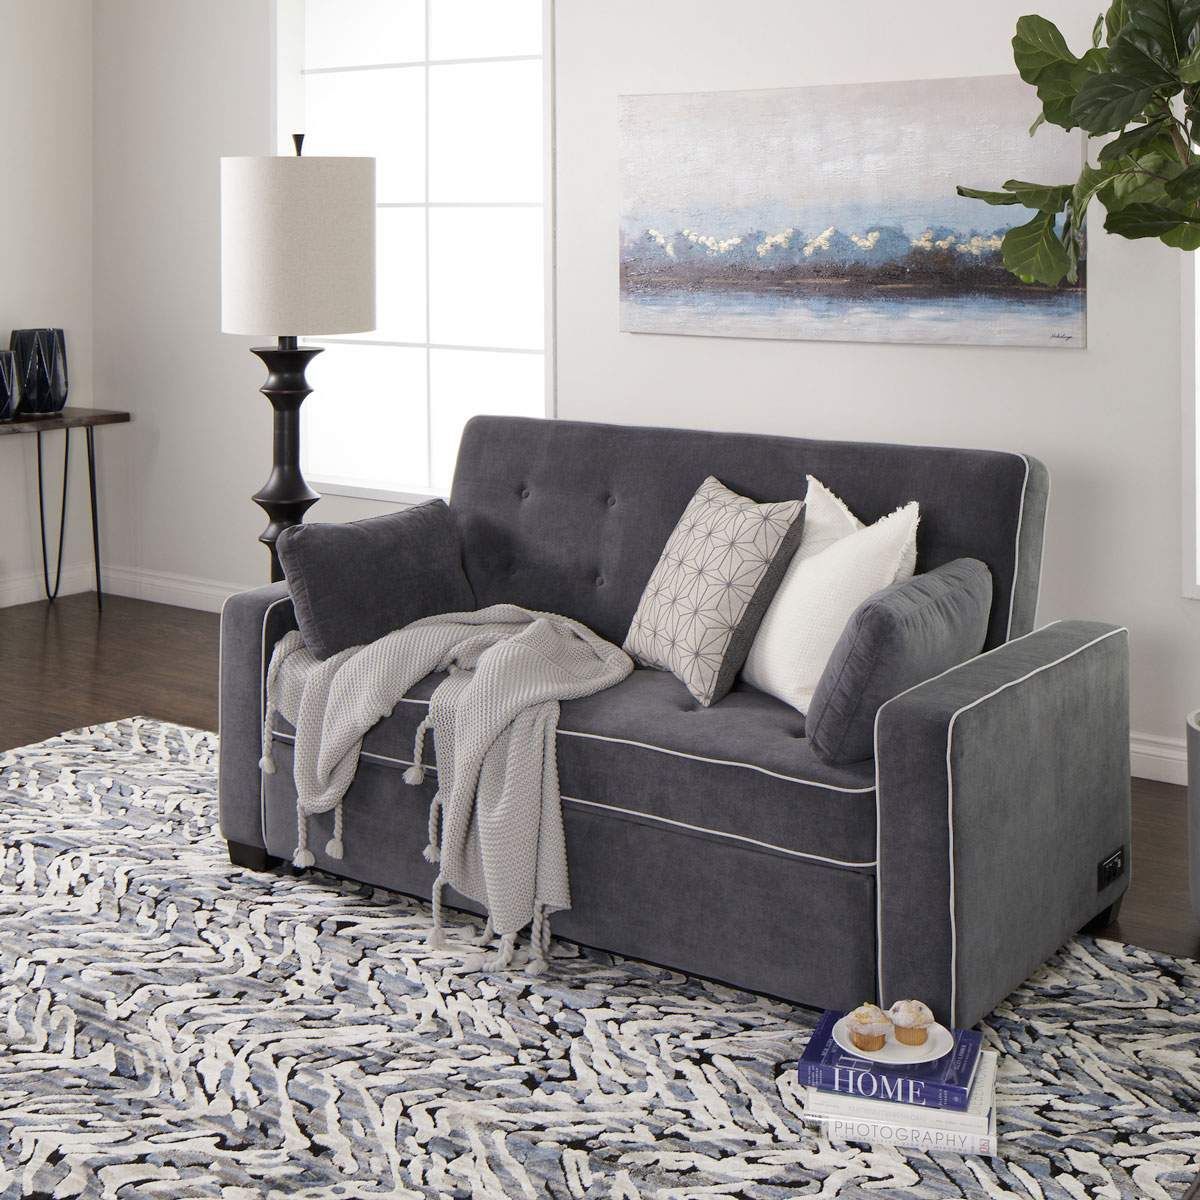 Grey Queen Pull Out Sleeper Sofa With Usb Port | Jerome's Furniture Inside 3 In 1 Gray Pull Out Sleeper Sofas (Gallery 4 of 20)